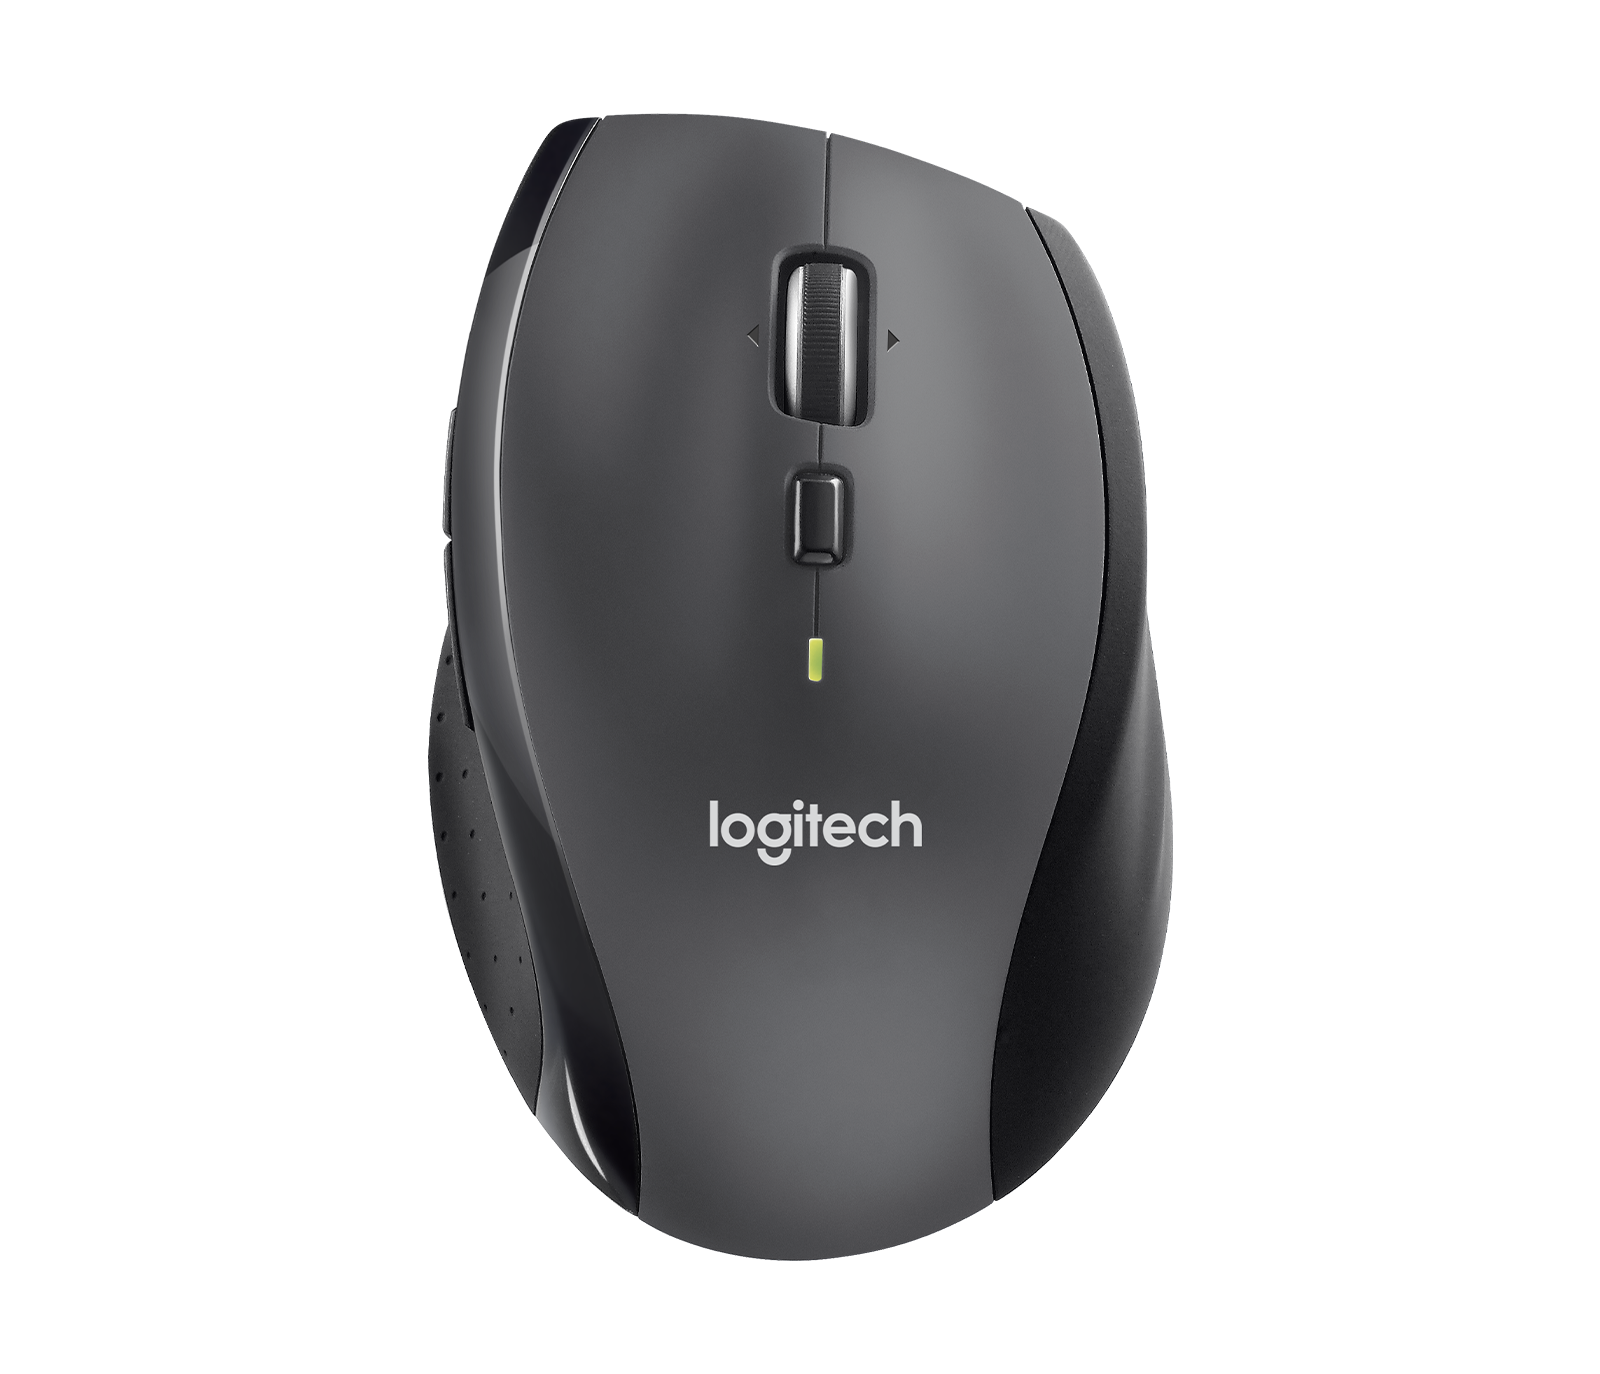 preview napkin pause Logitech M705 Marathon Wireless Mouse with 3Y Battery Life